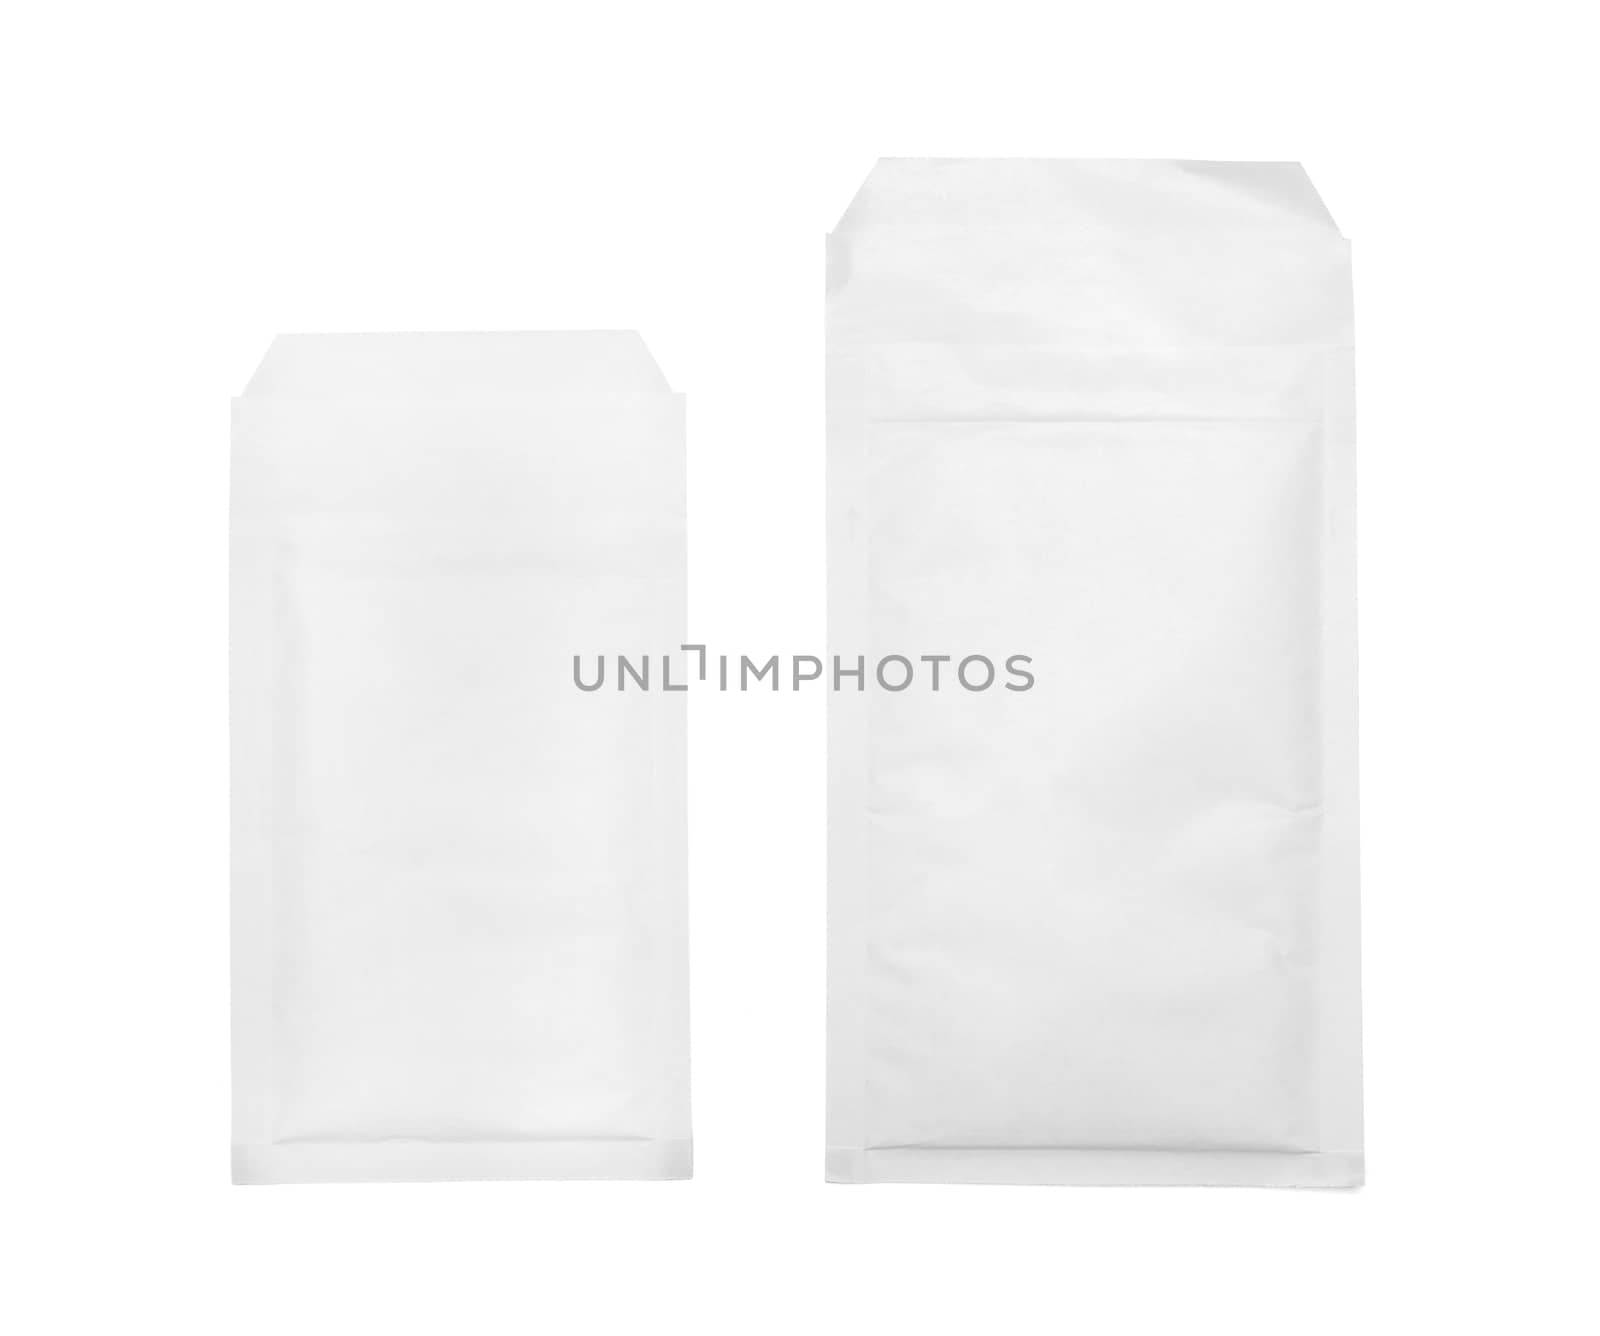 Thick white envelope on a white background by DNKSTUDIO